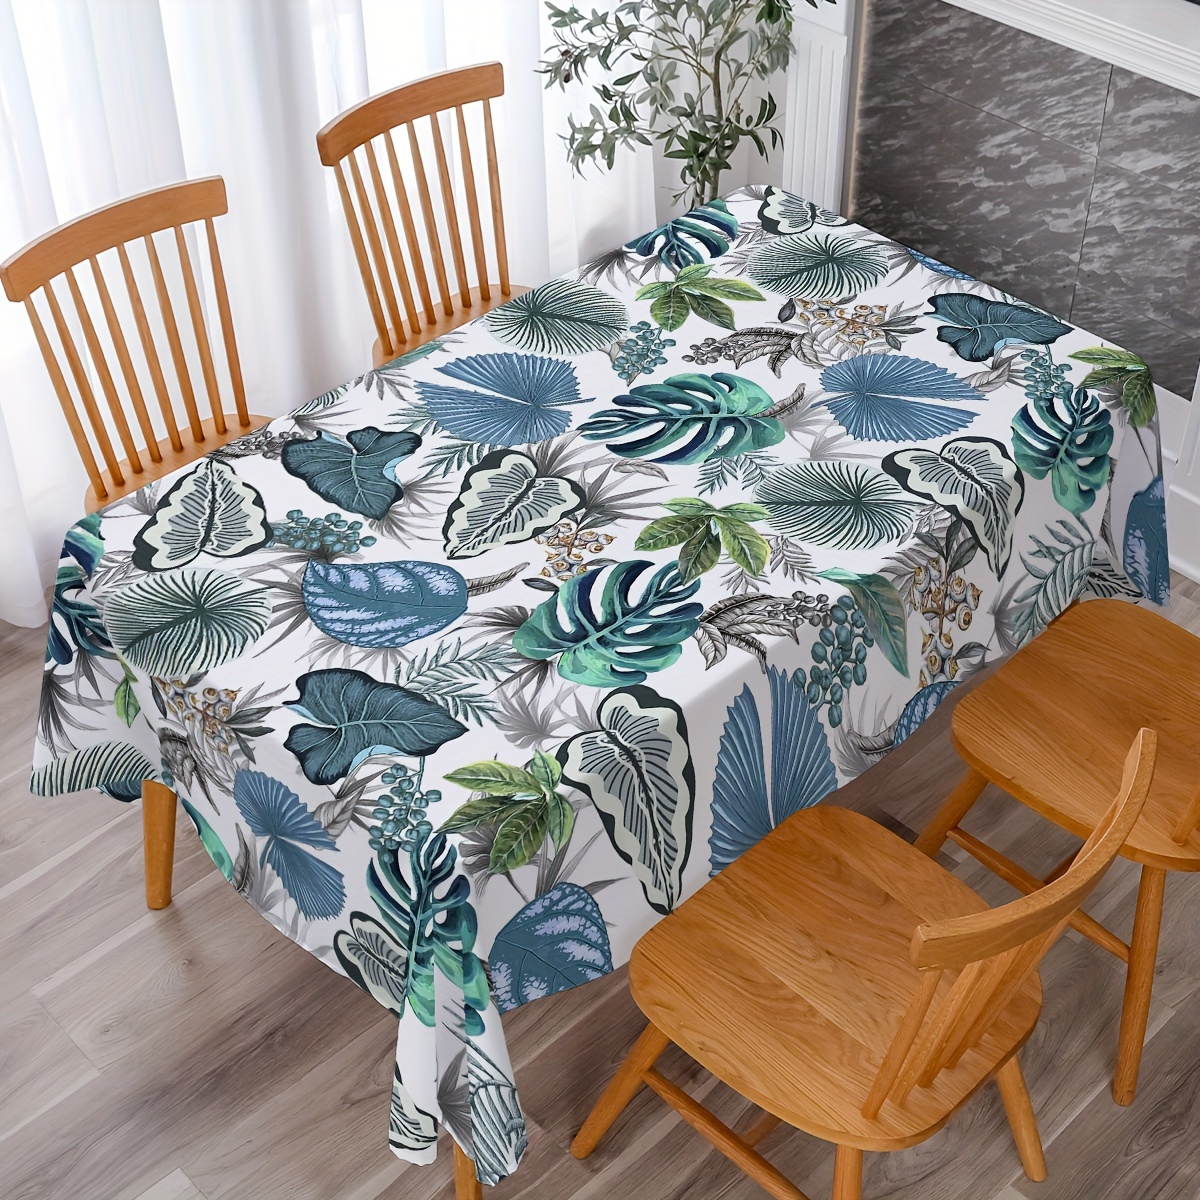 

1pc Tablecloth, Tropical Leaf Pattern Printed Table Cloth, Rectangular Simple Style Polyester Tablecloth, For Picnics Or Holiday Parties, Room Decoration, Table Decor, Home Supplies